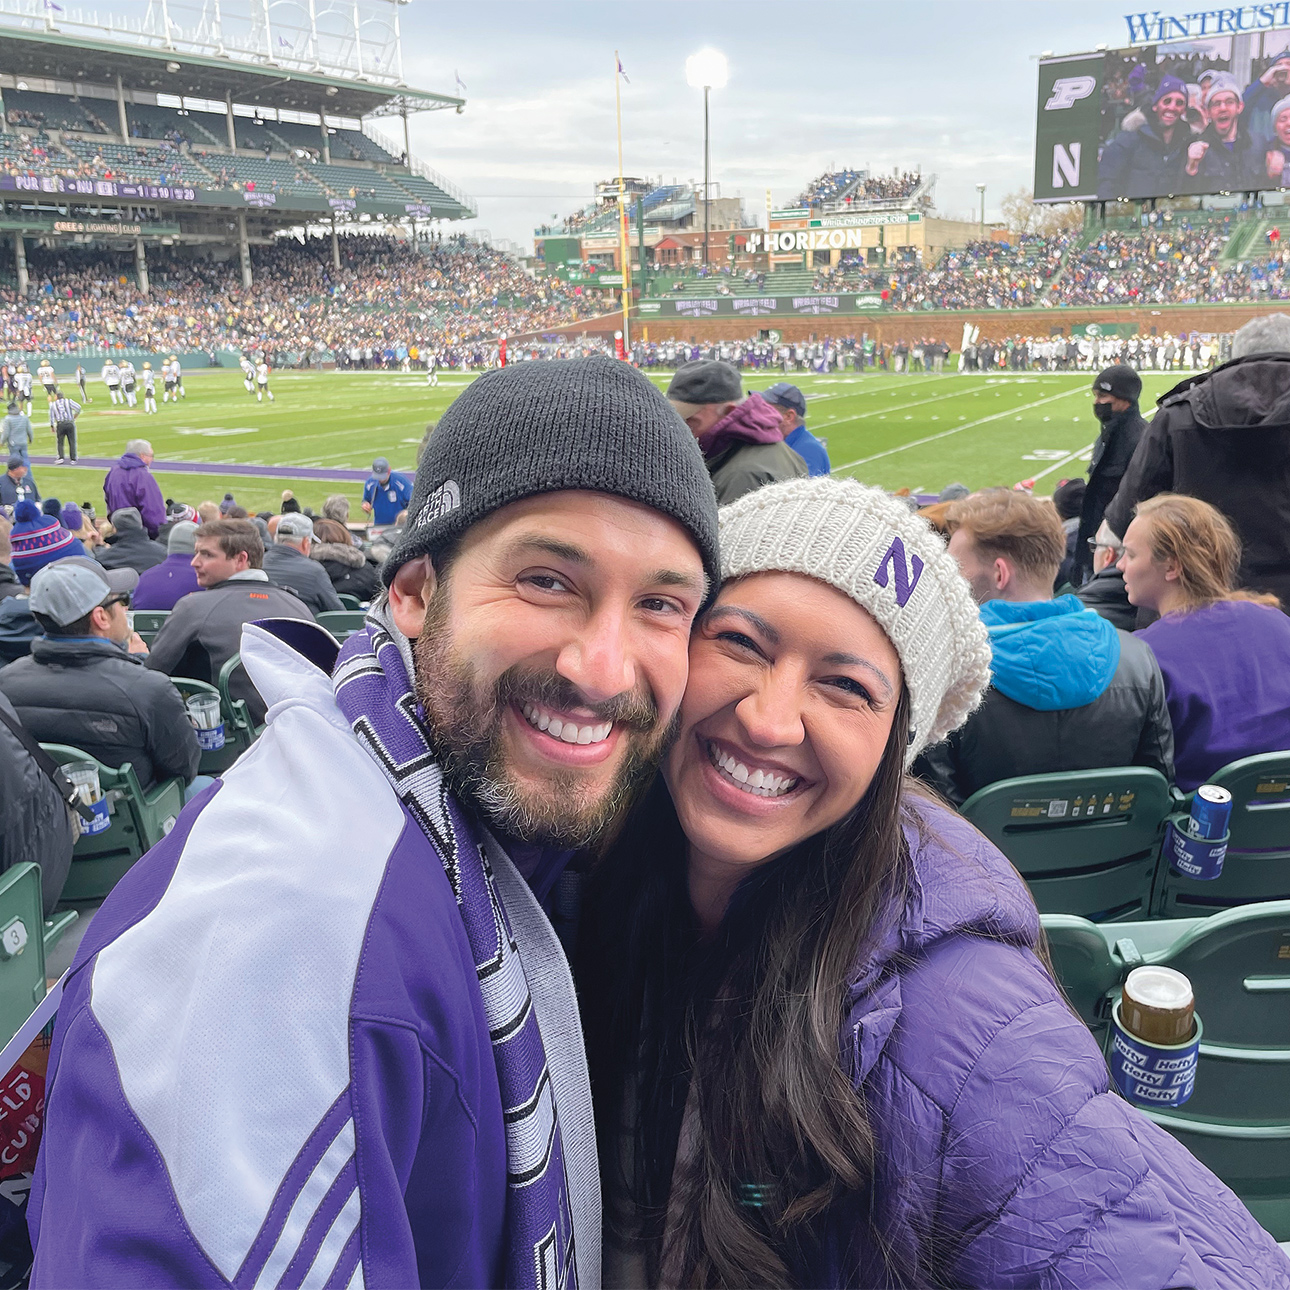 NU Loyal members David Leuchter and Dulce Vasquez pose together in the stands at a Northwestern football game at Wrigley Field, smiling for the camera. Leuchter is wearing a Northwestern jacket and scarf, and Vasquez is wearing a hat with a Northwestern N. A large crowd is visible in the background as well as several football players on the field.